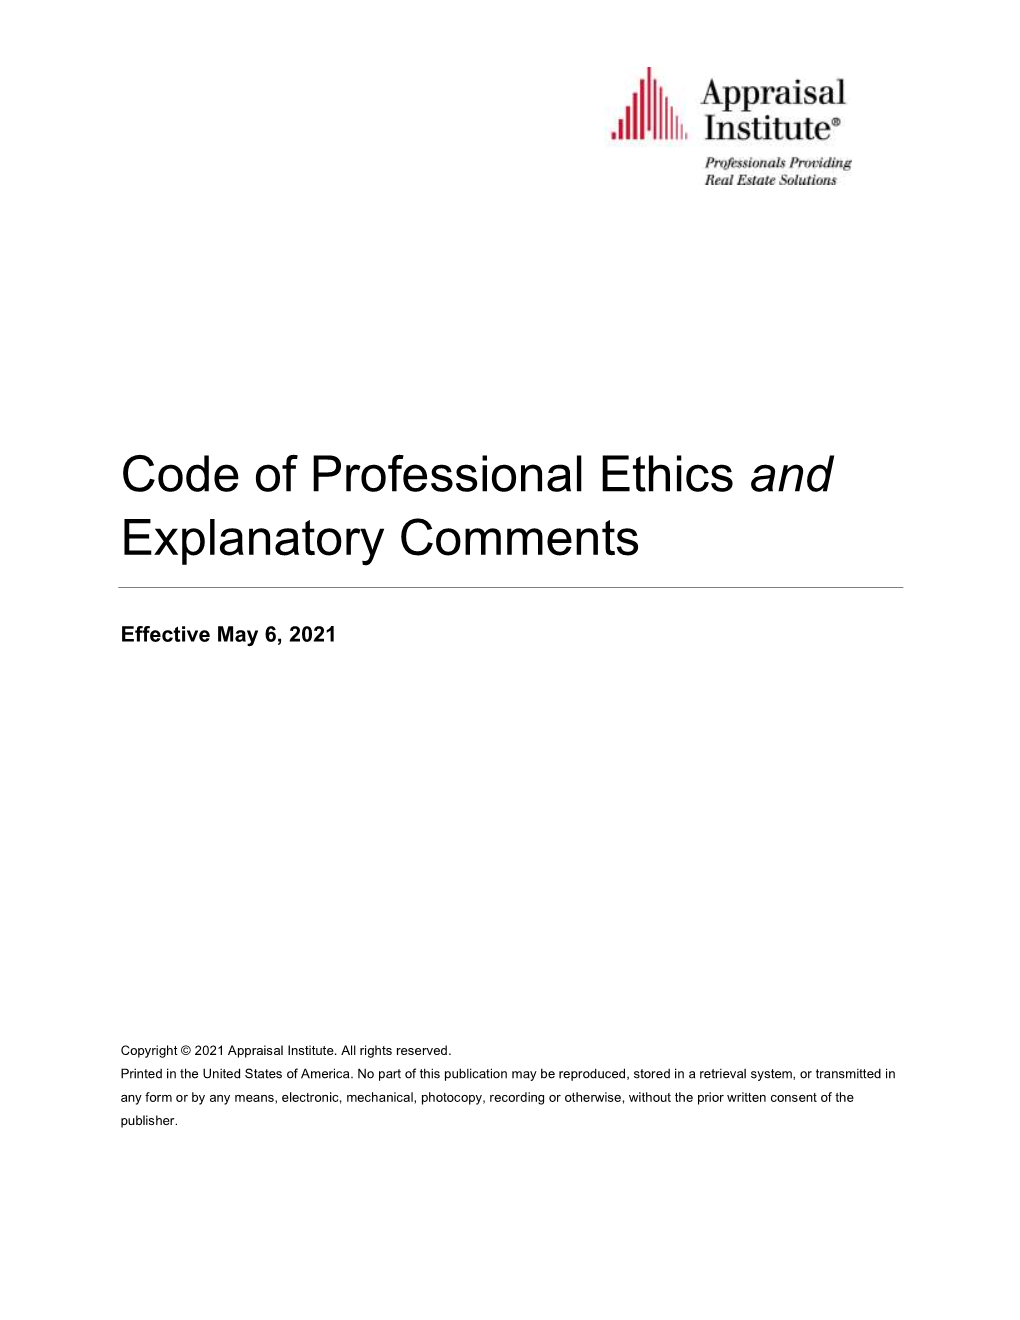 Code of Professional Ethics and Explanatory Comments